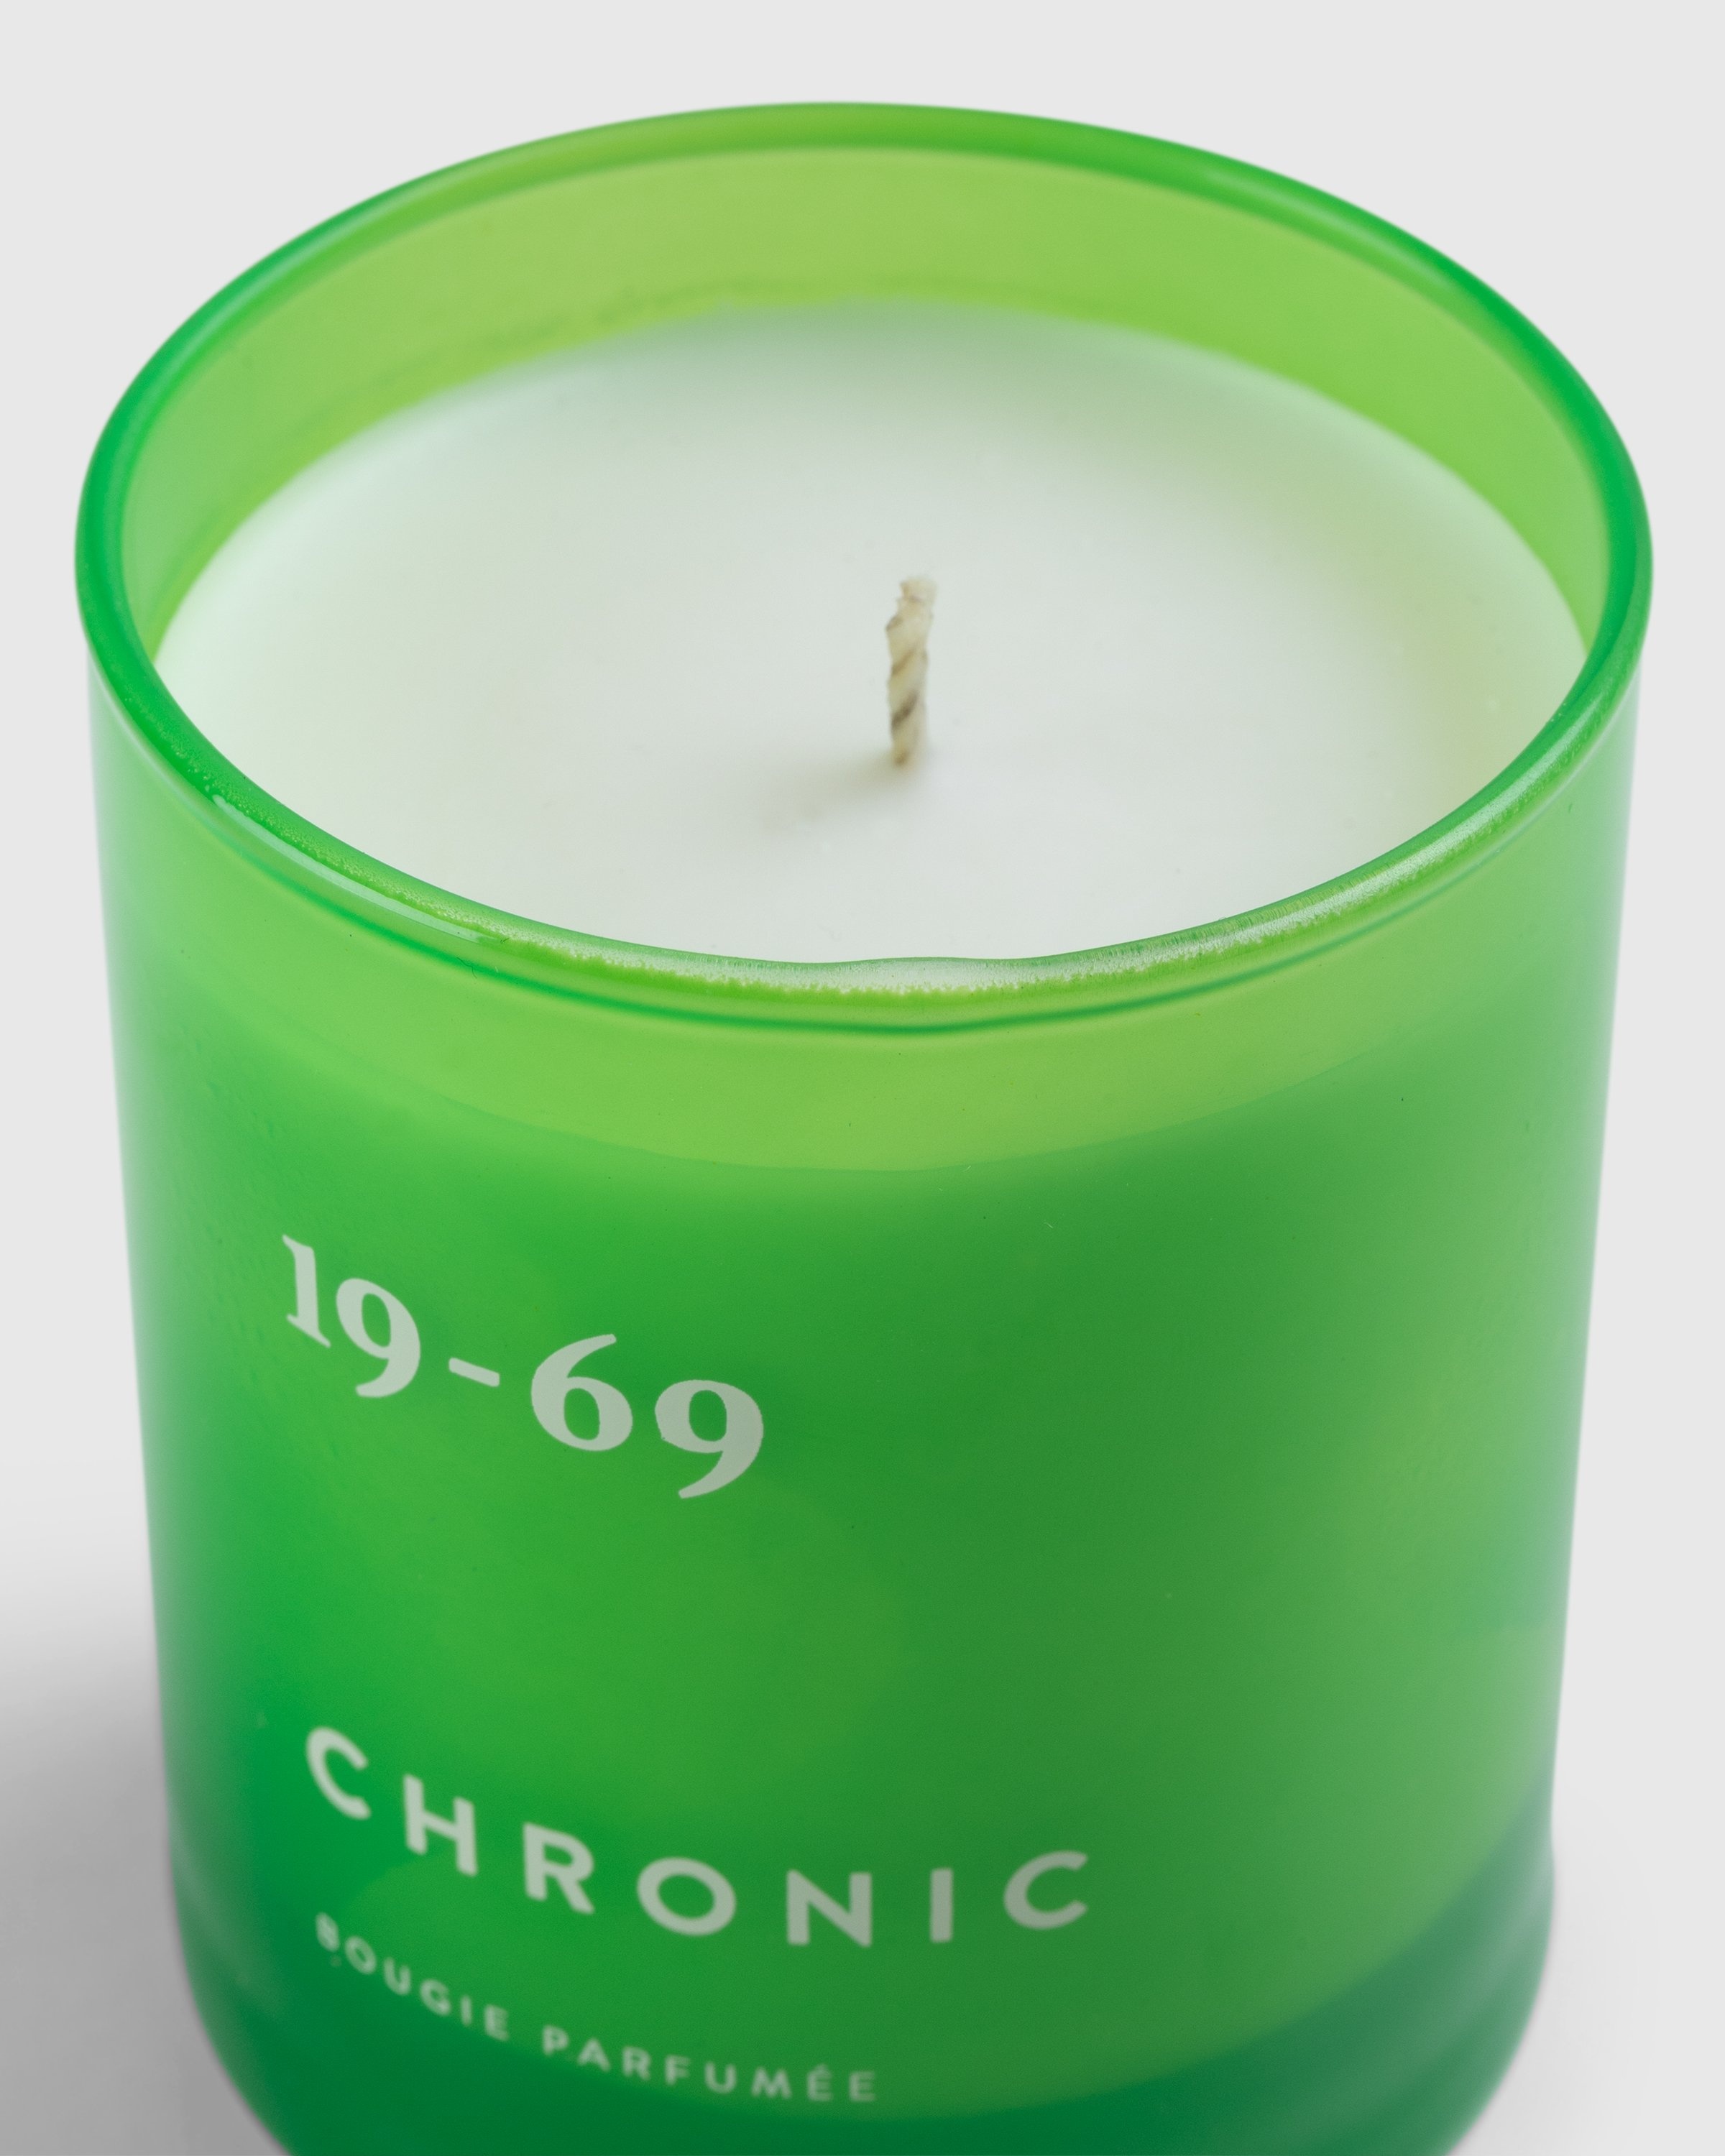 19-69 – Chronic BP Candle - Candles - Green - Image 3